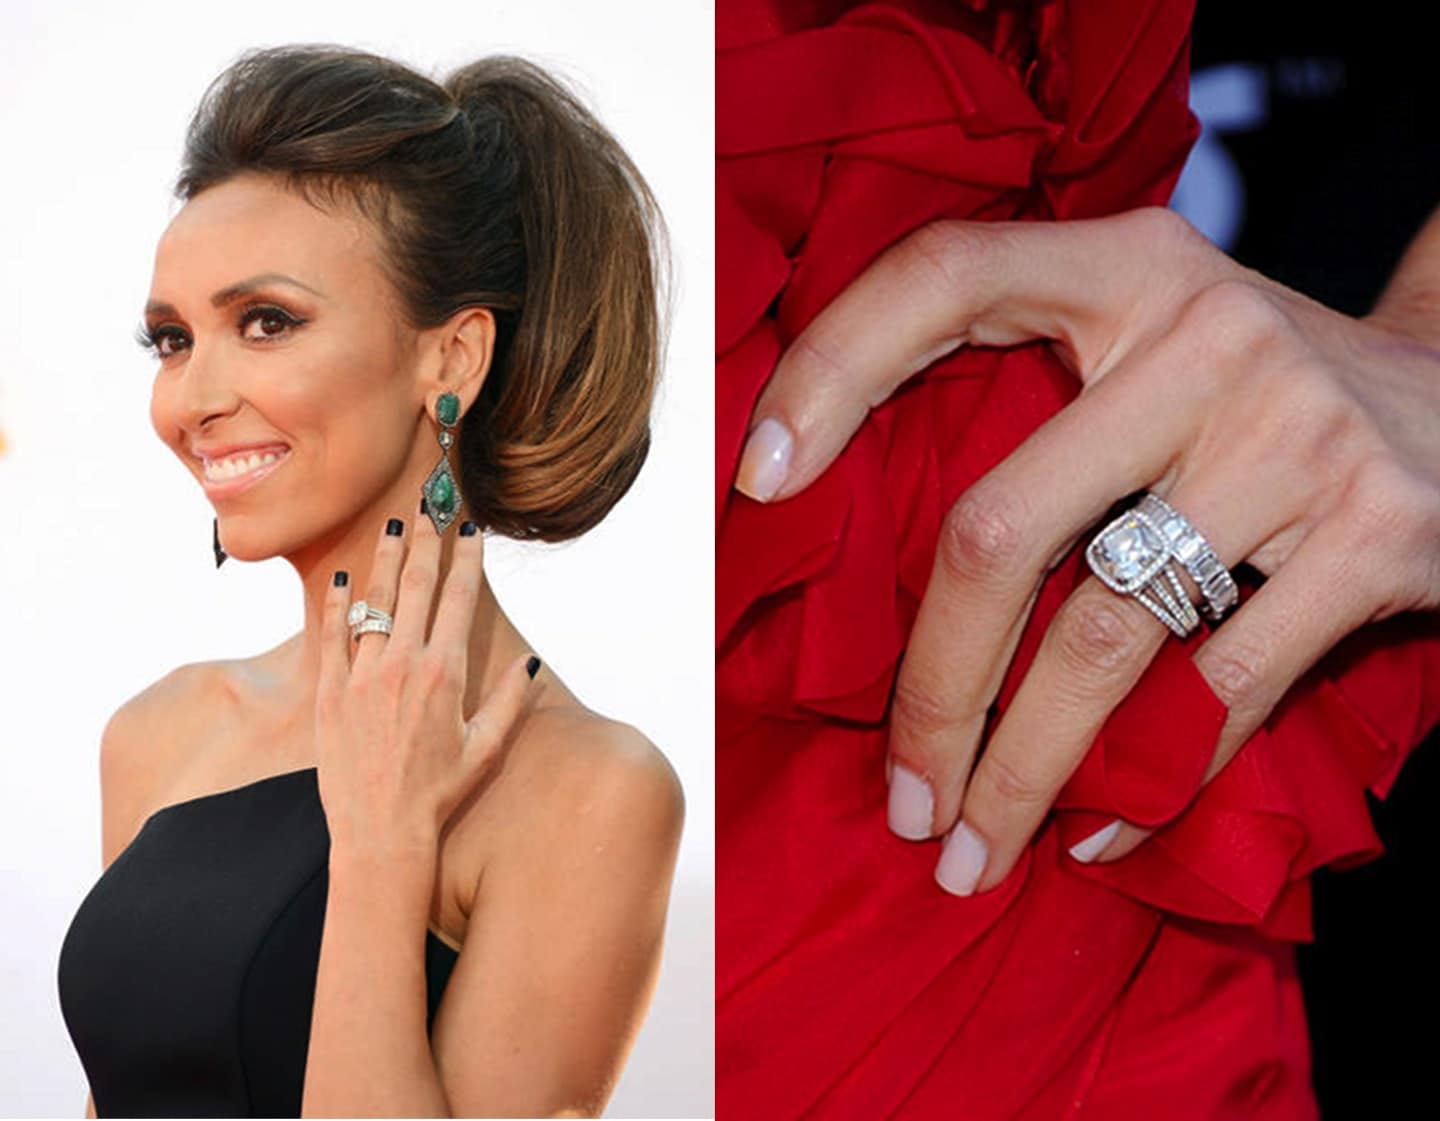 How to Copy (and propose with) Celebrity Engagement Rings